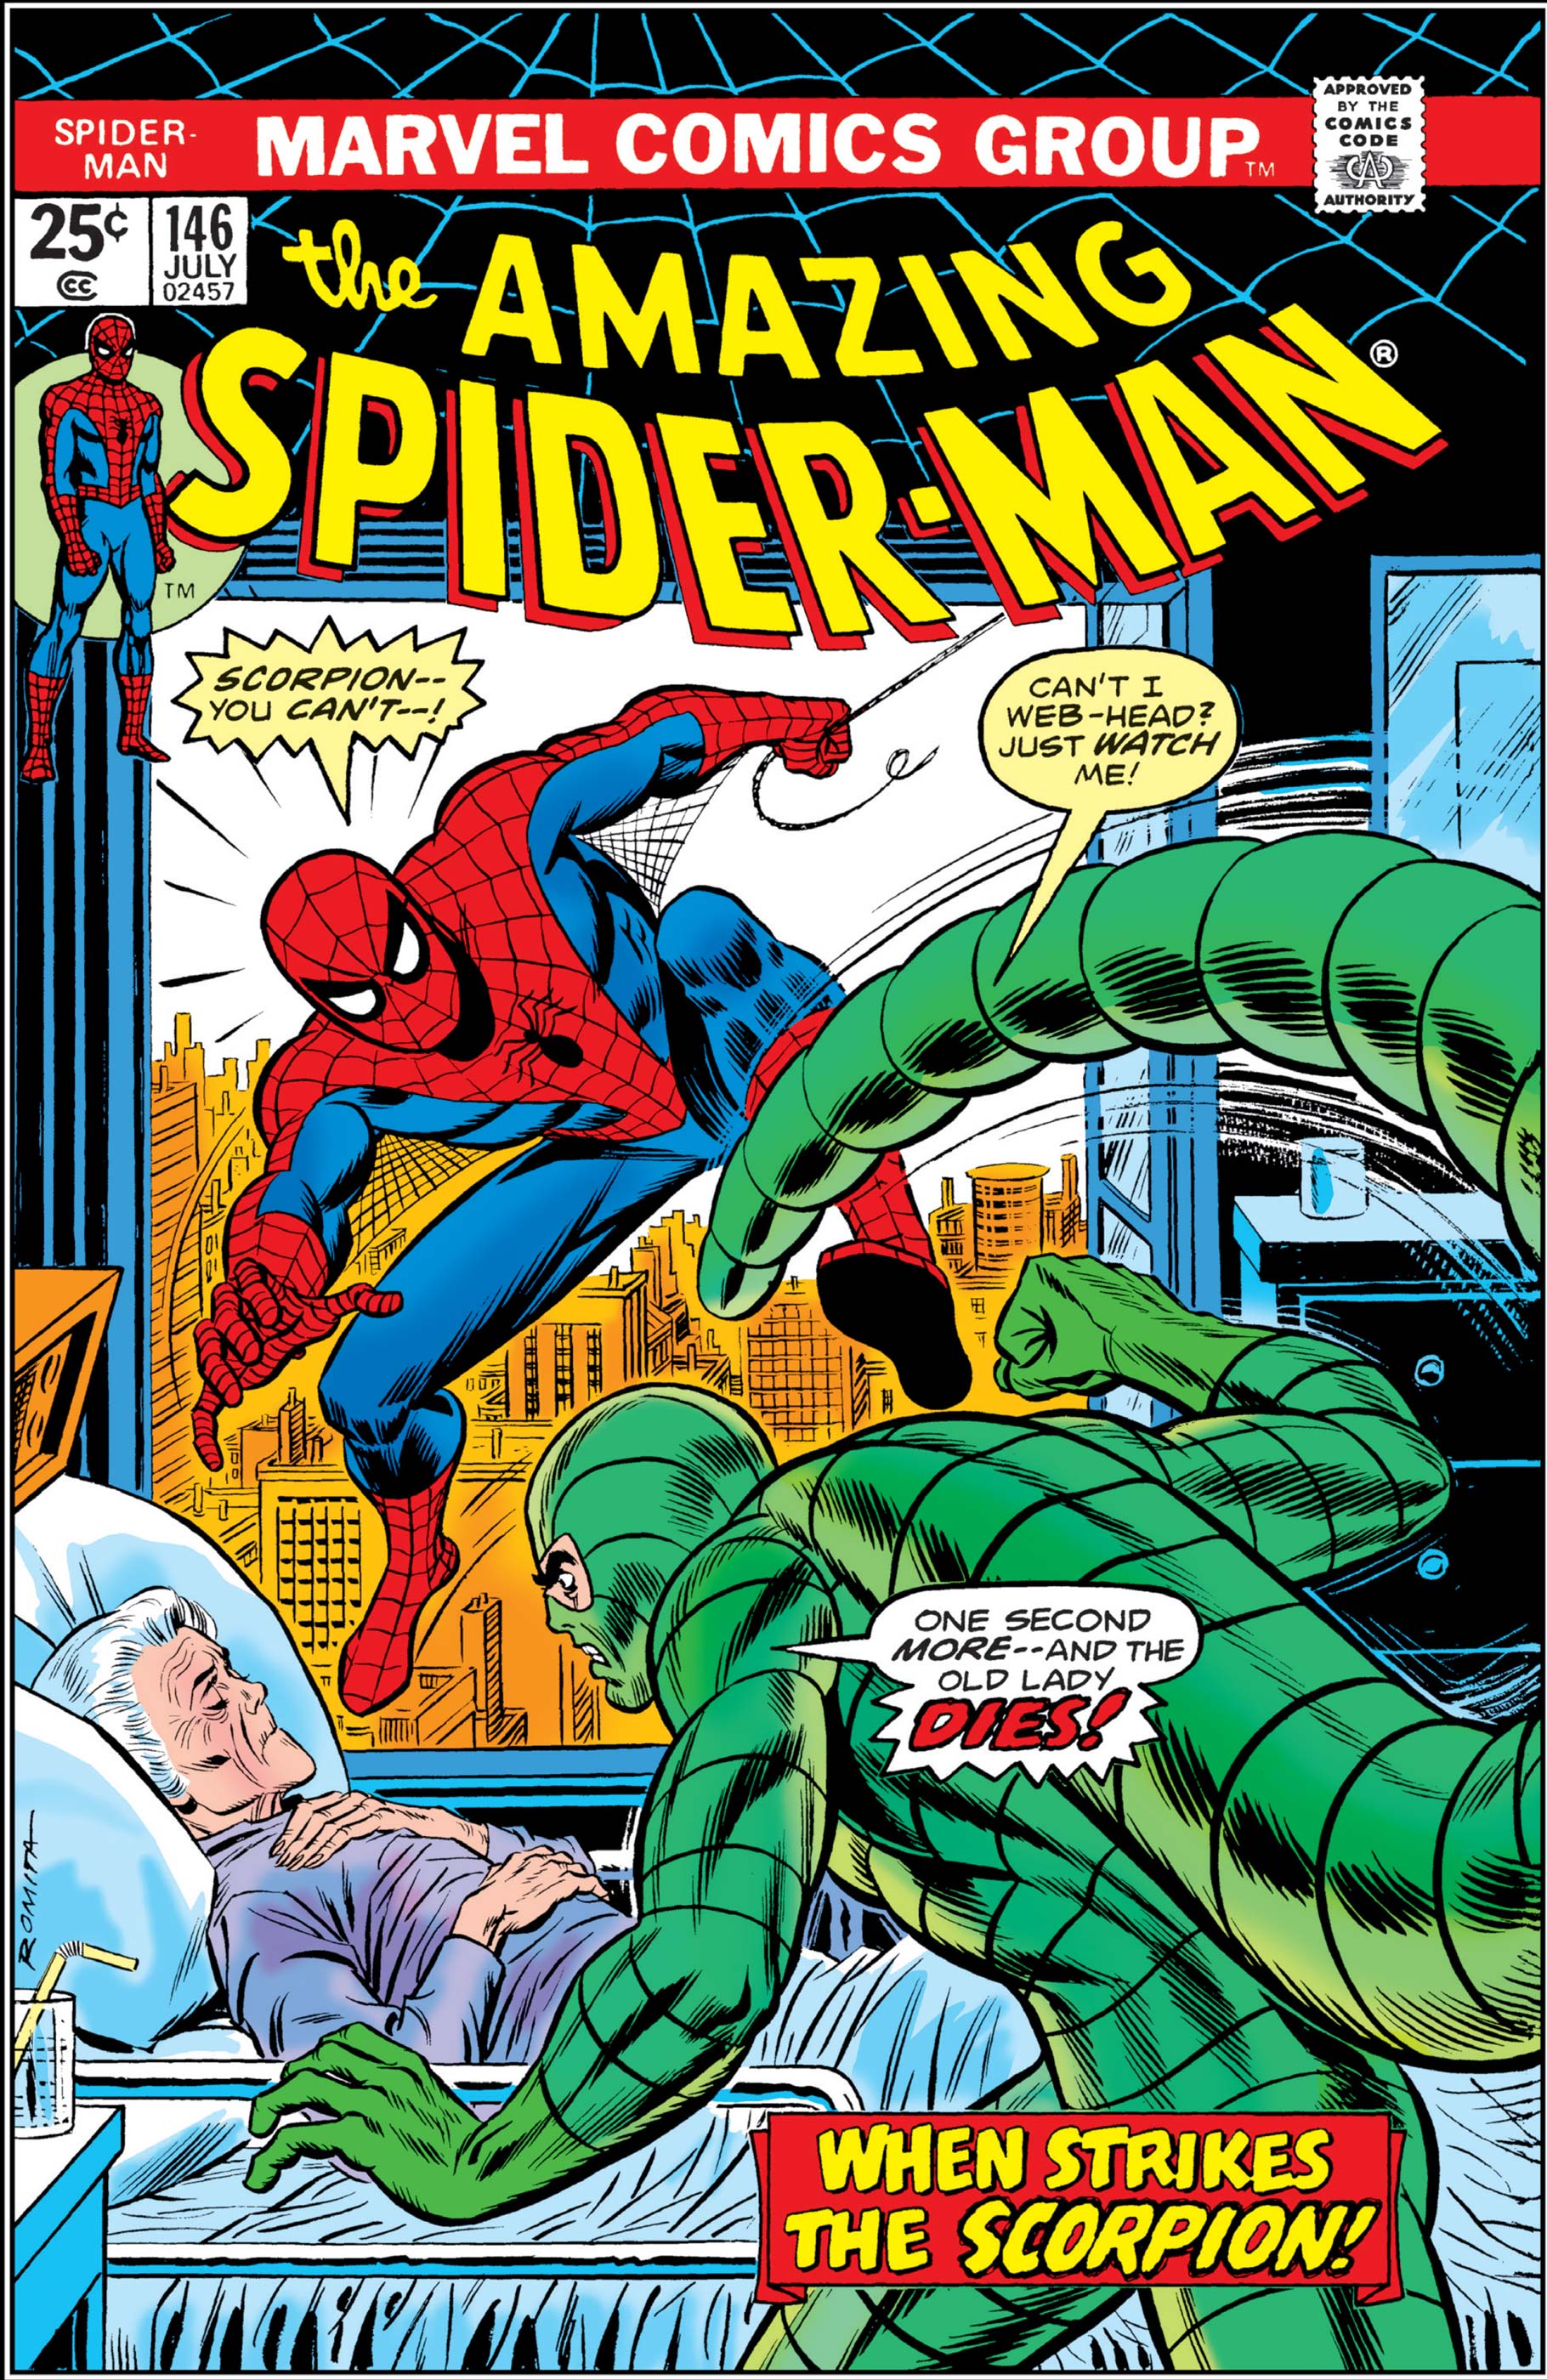 The Amazing Spider-Man (1963) #146 | Comic Issues | Marvel